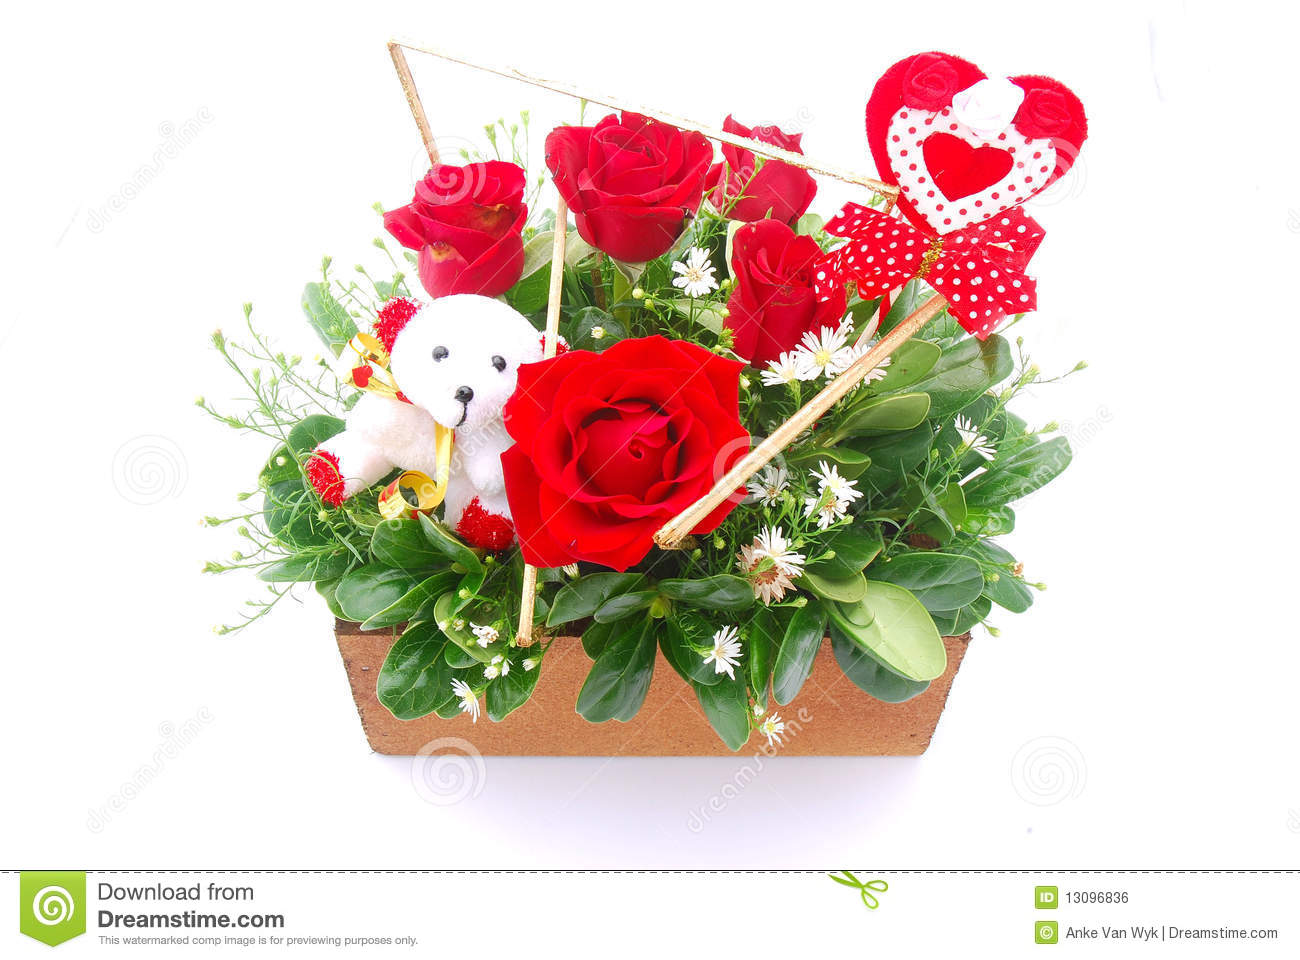 Flower Bouquet For Valentine S Day Royalty Free Stock Image   Image